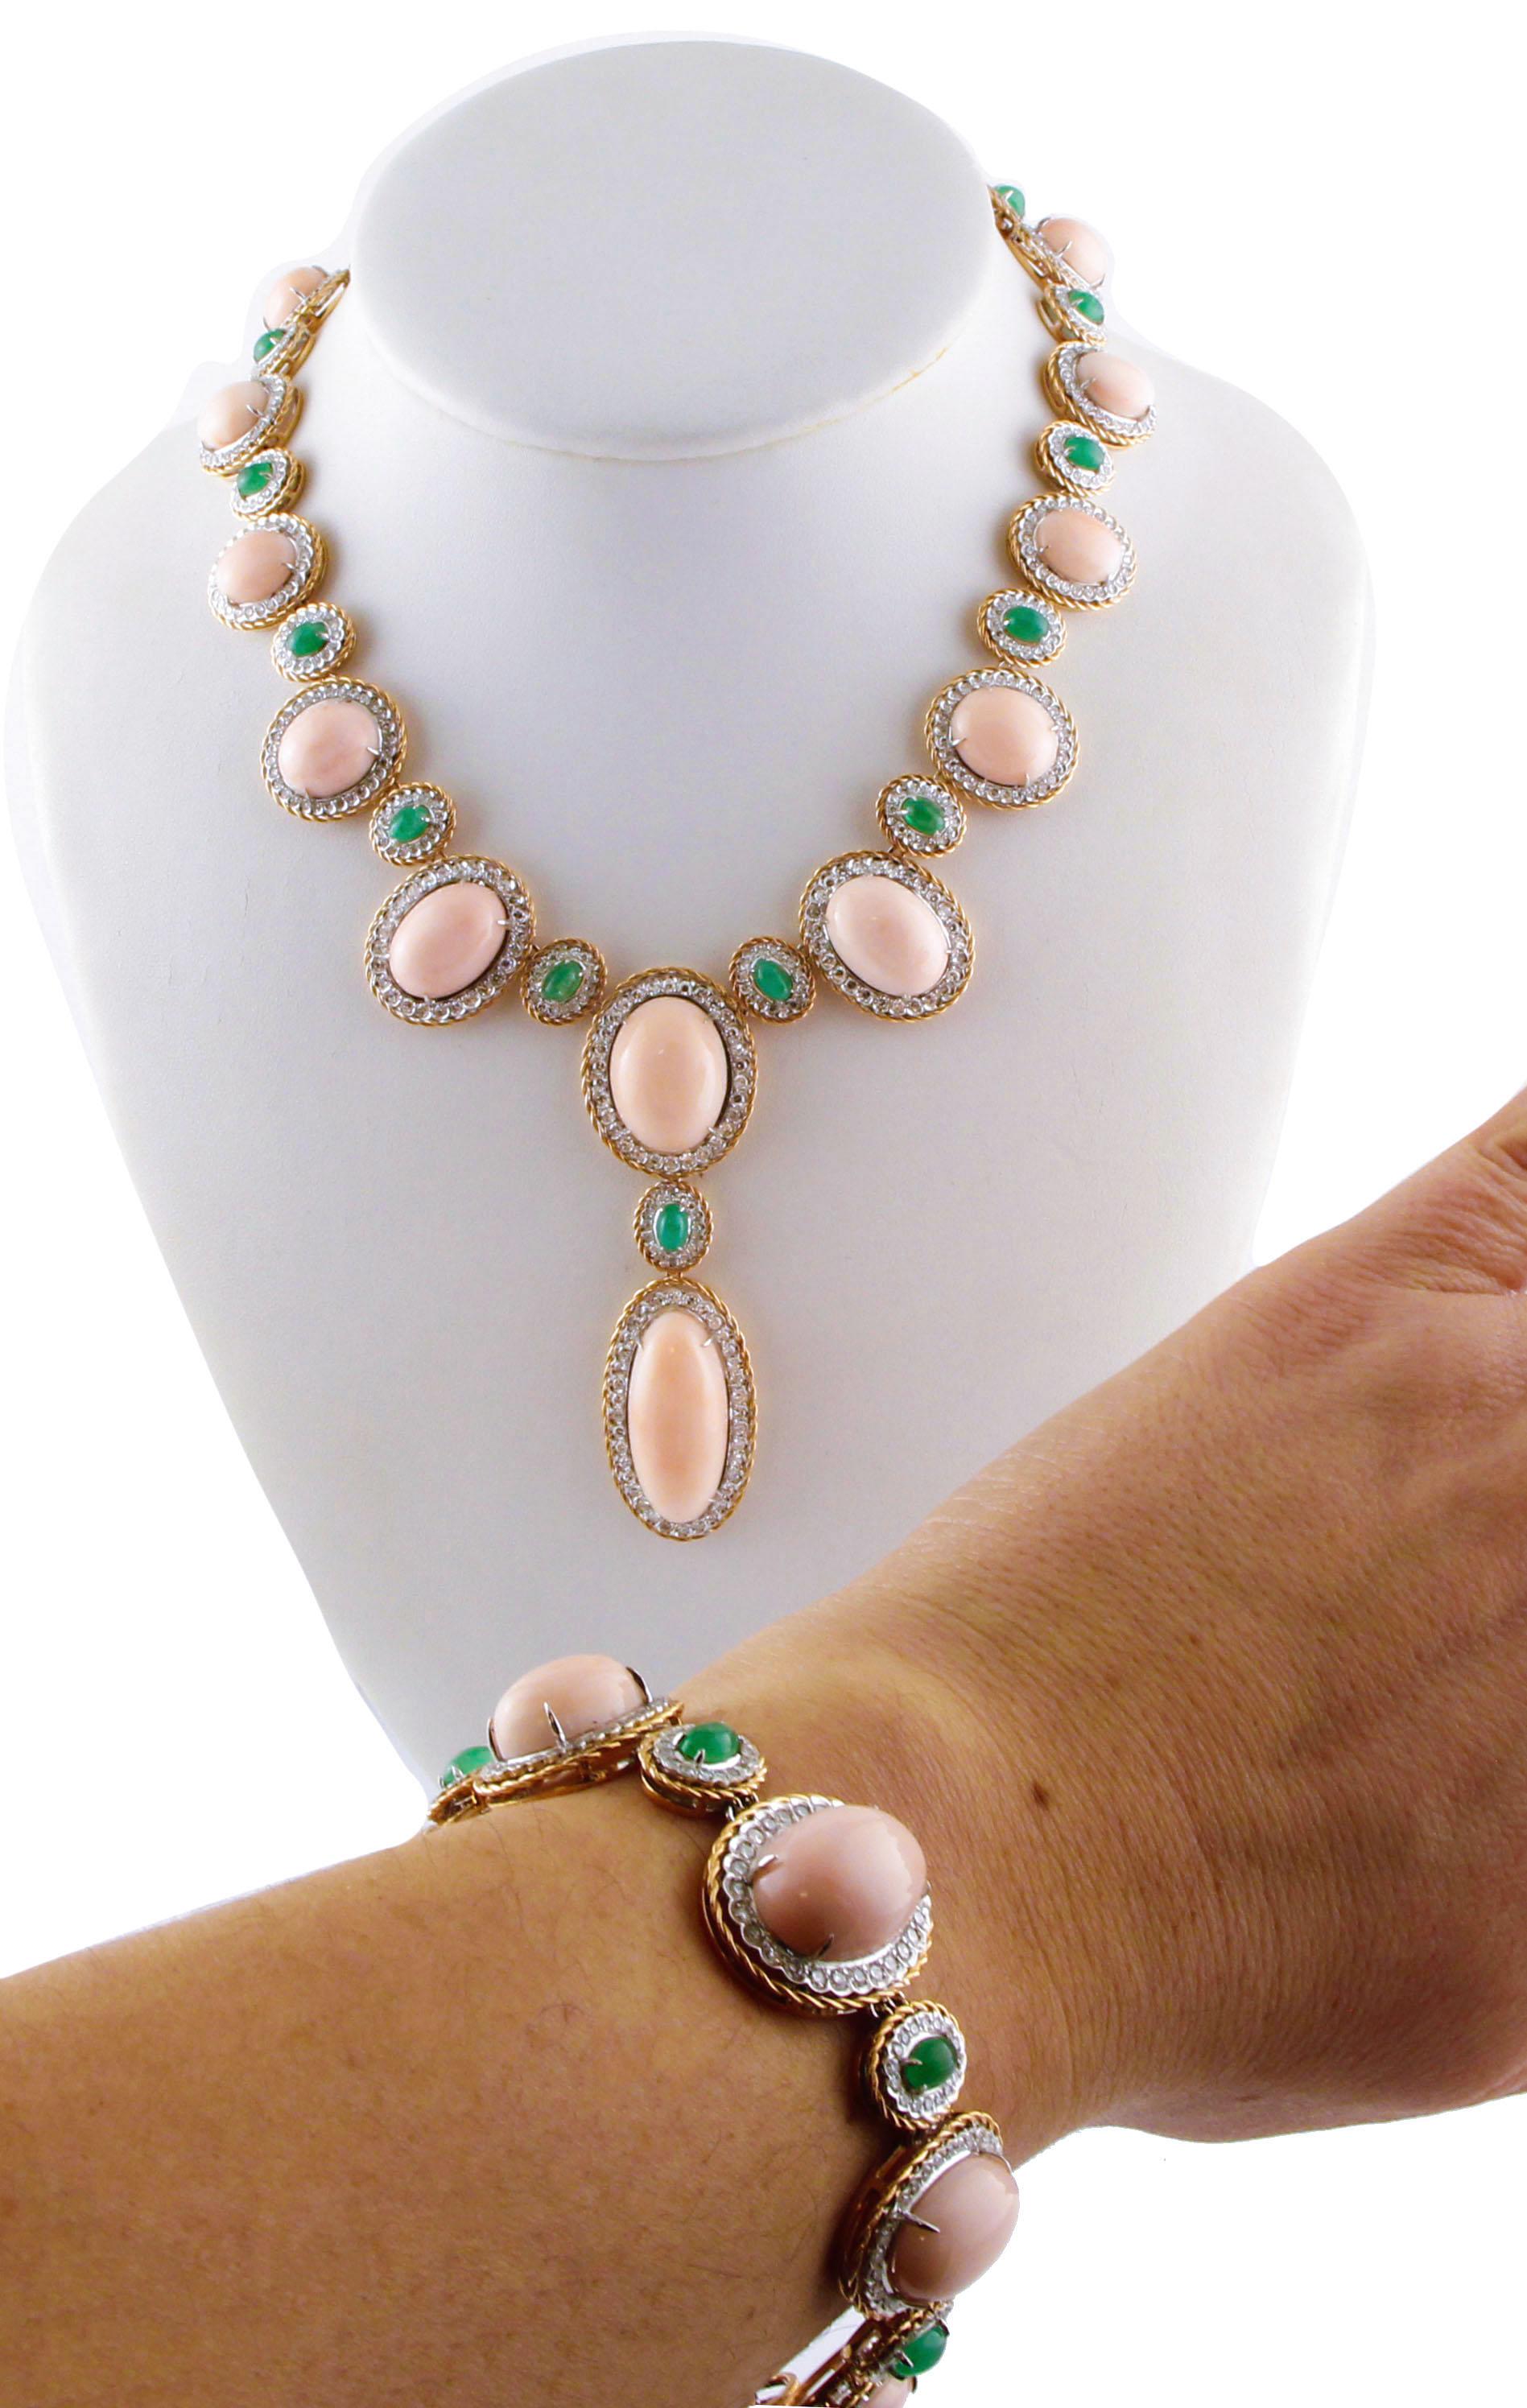 Brilliant Cut Oval Shape Pink Coral, Diamonds, Emeralds, Rose White Gold Necklace